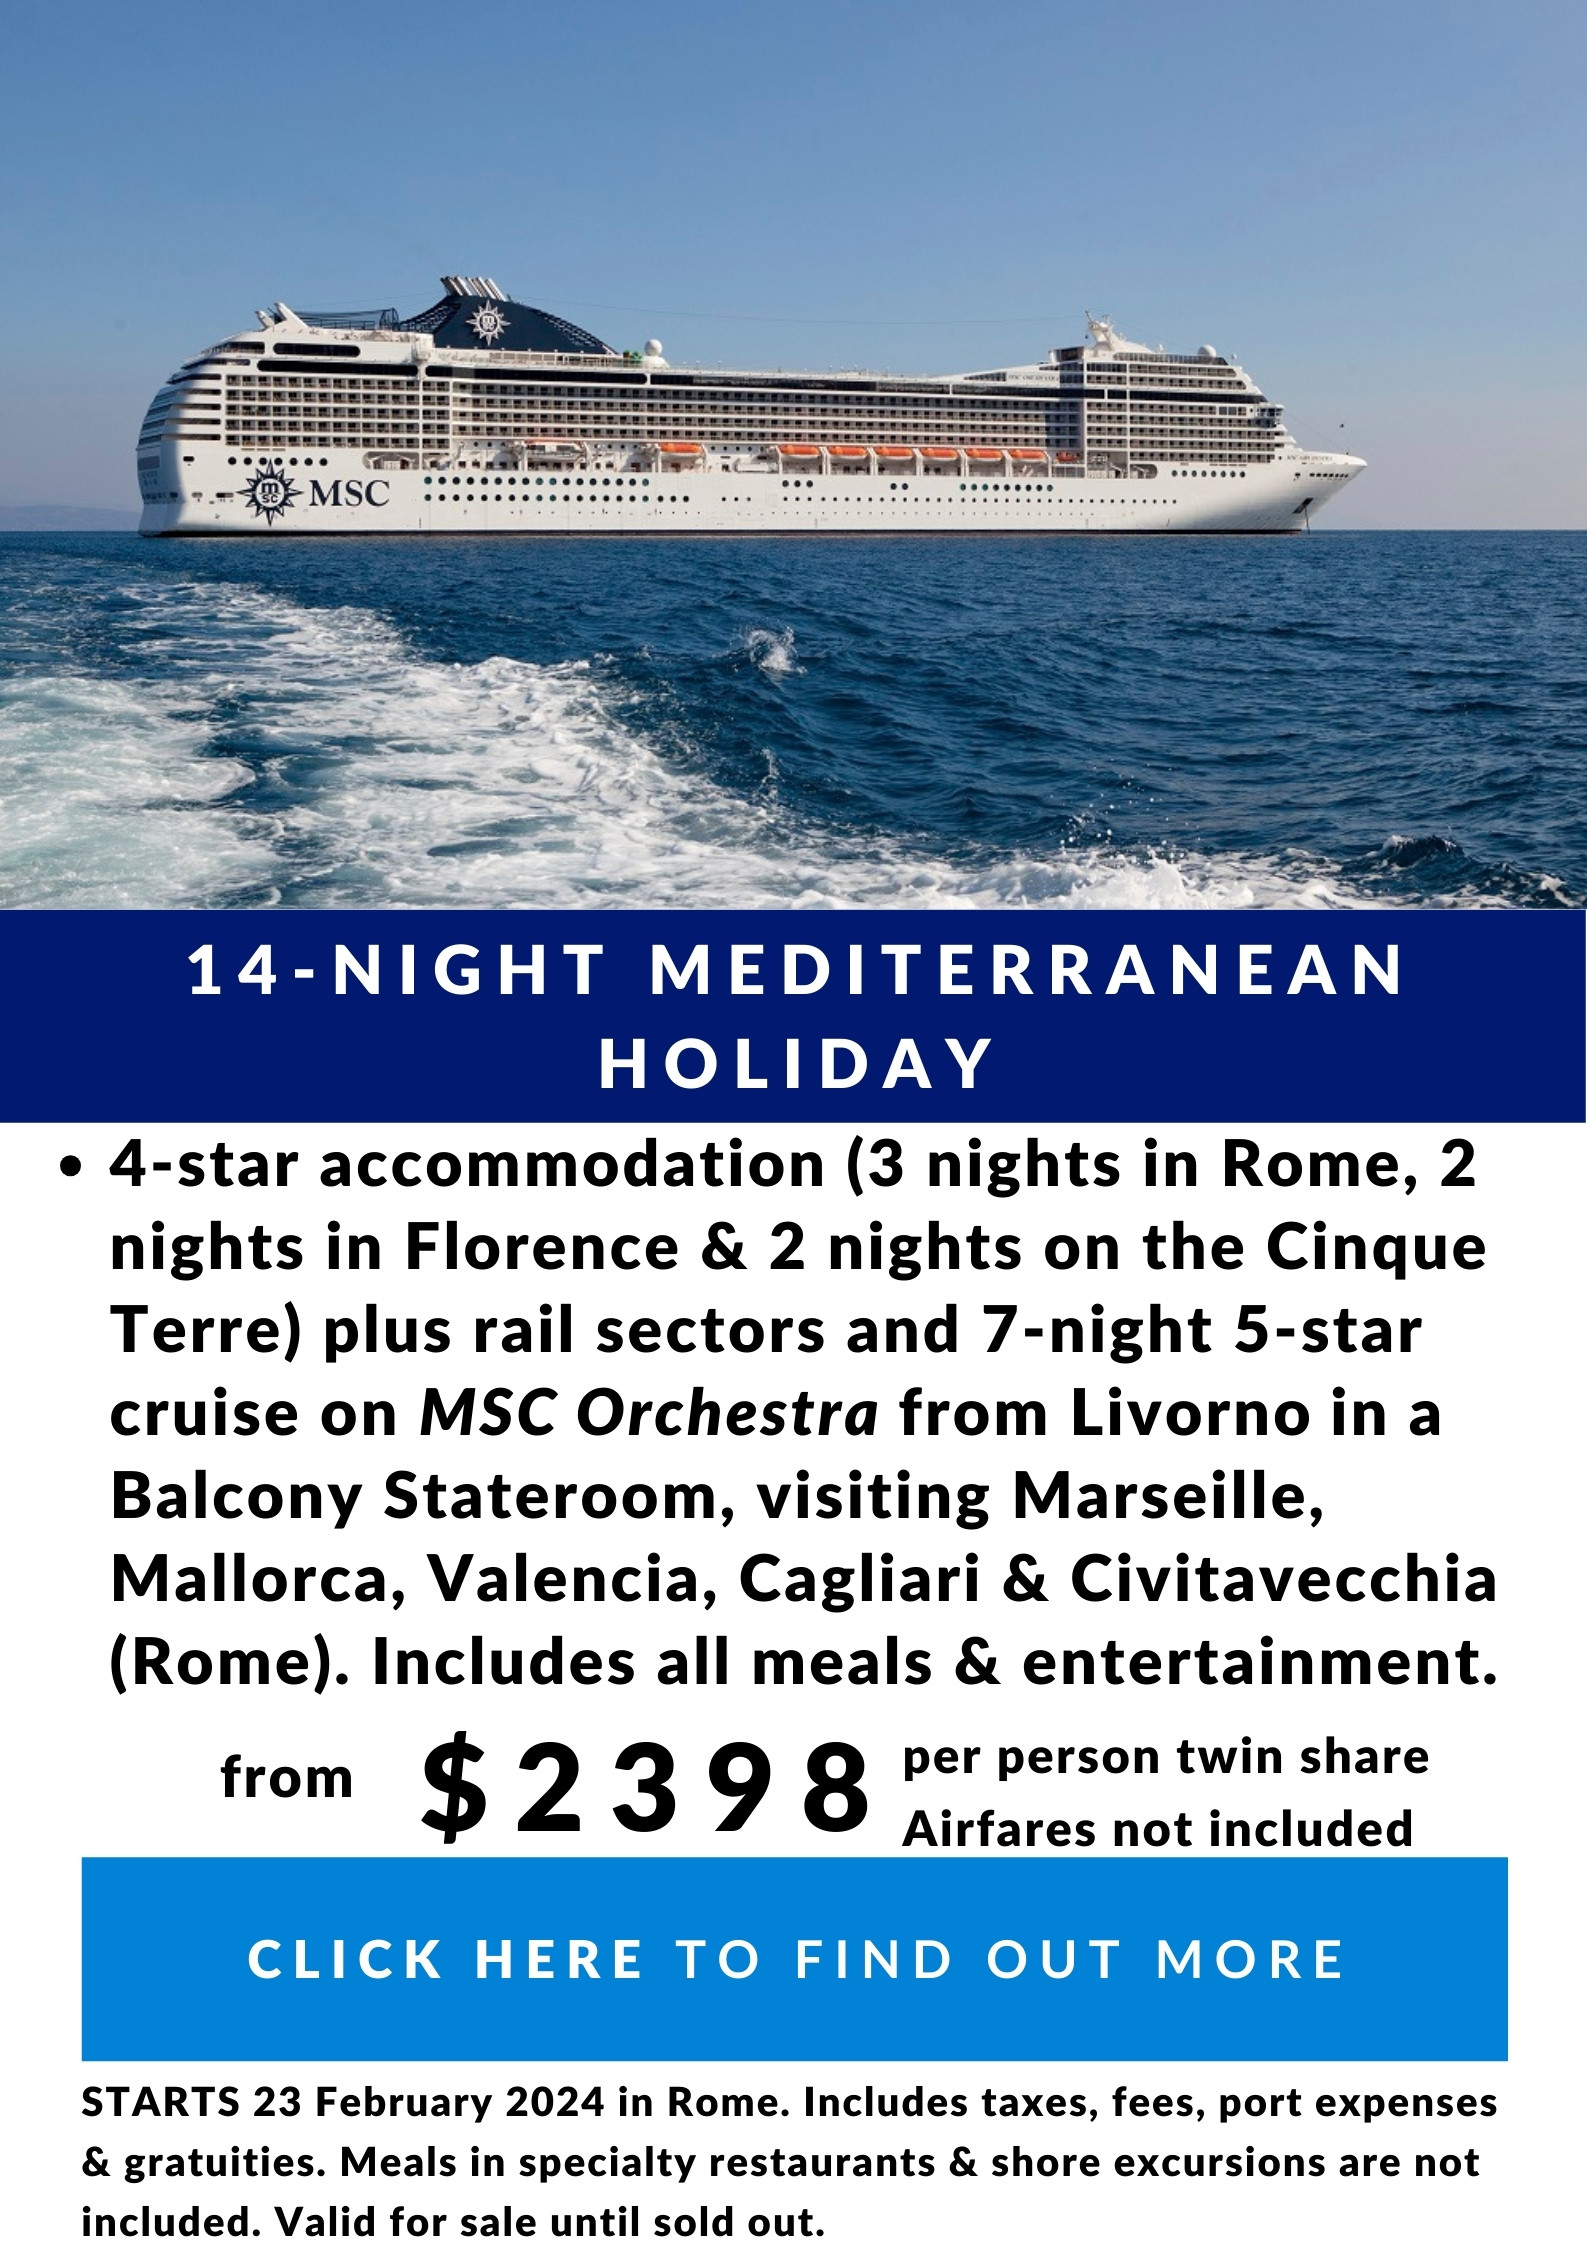 From $2398 per person twin share